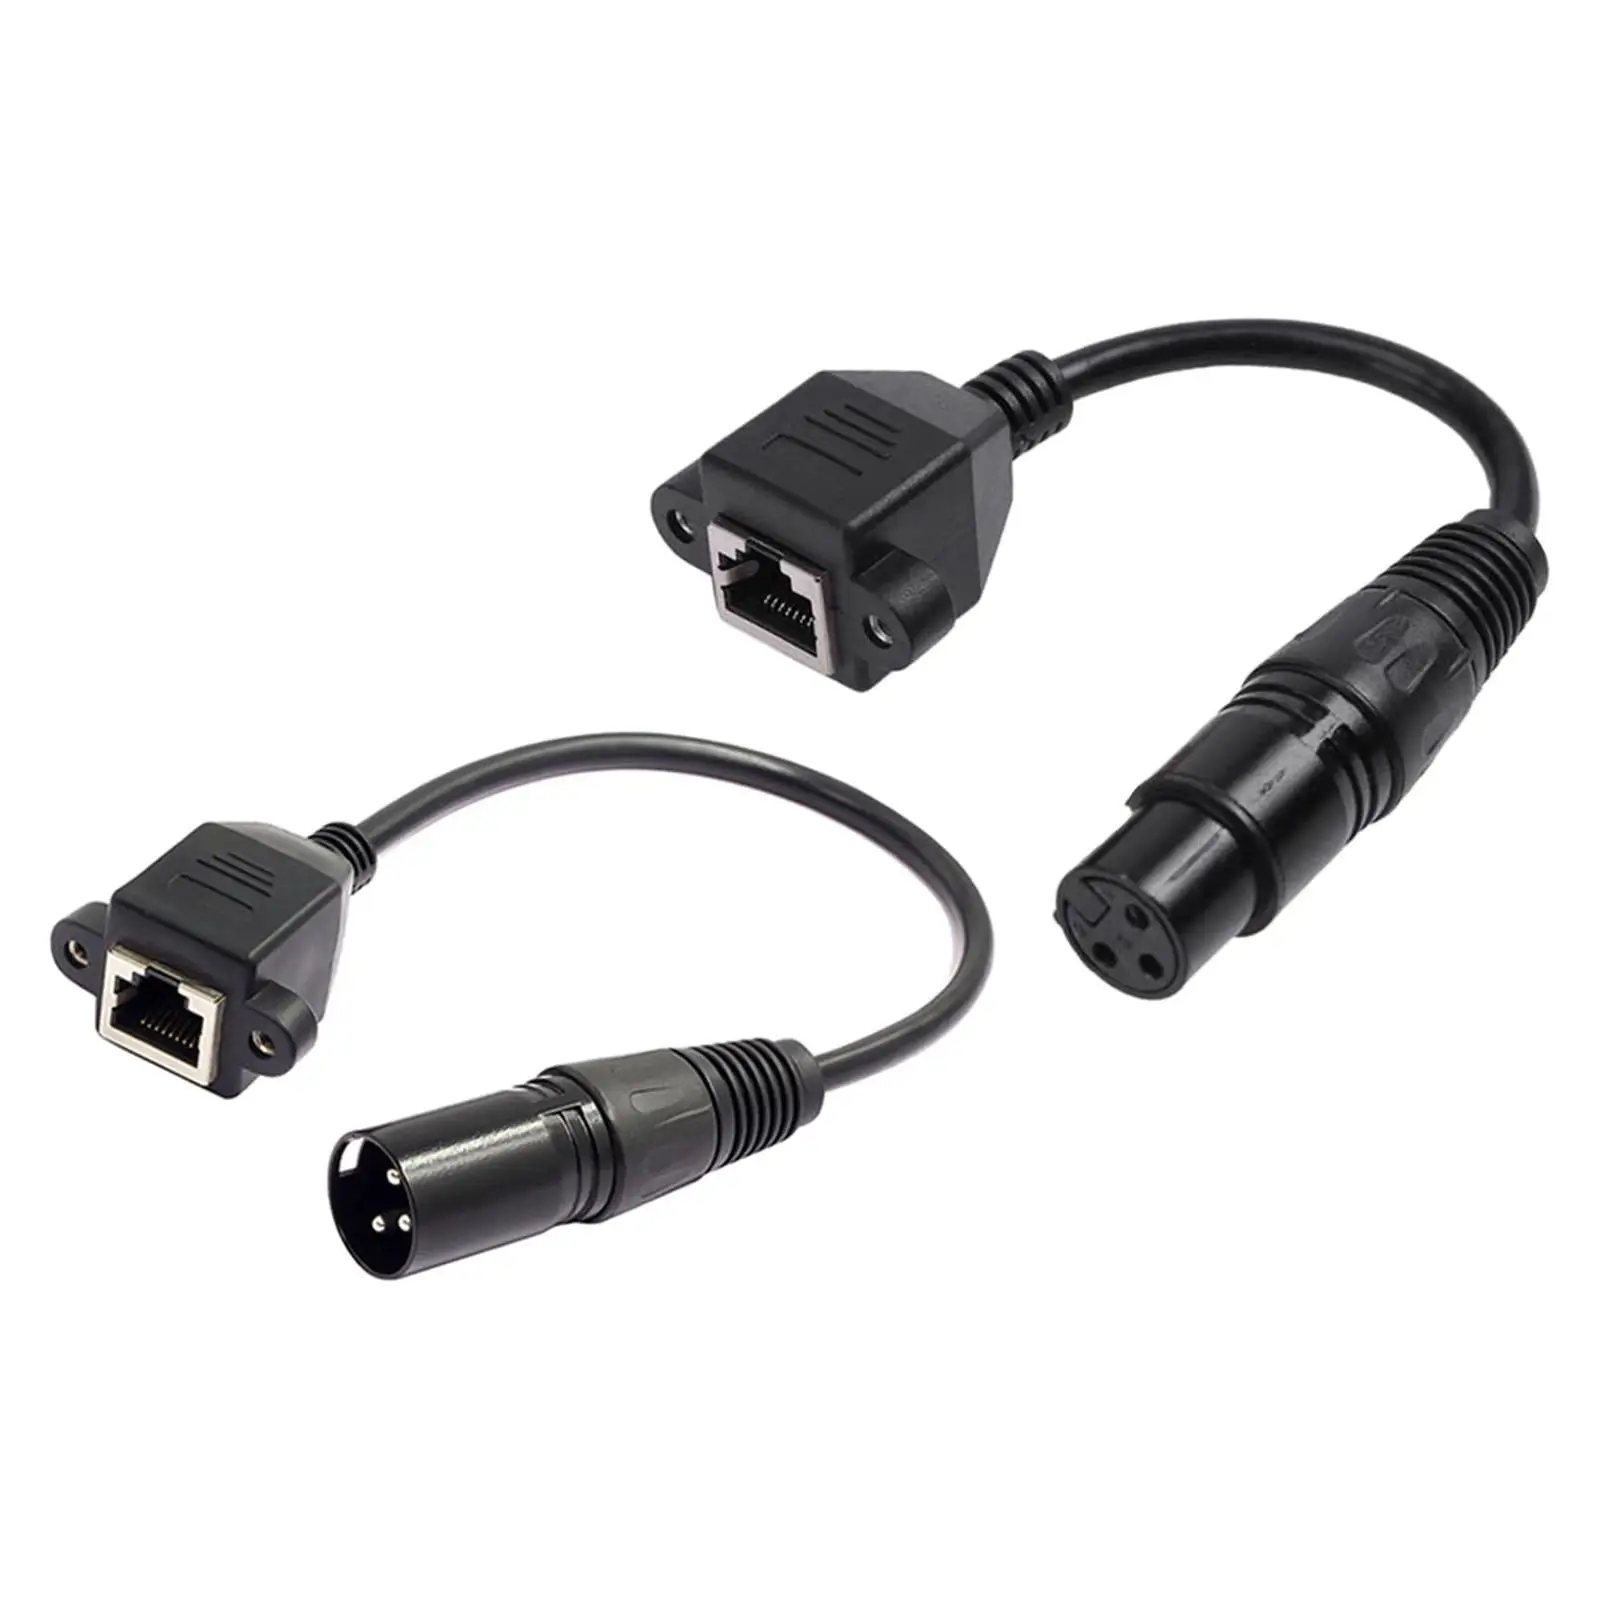 1Pair 3 Pin XLR to RJ 45 Female Male Adapter Cables, Copper Extension Cable for Dmx Con Controller Series Microphones Mixer 20cm